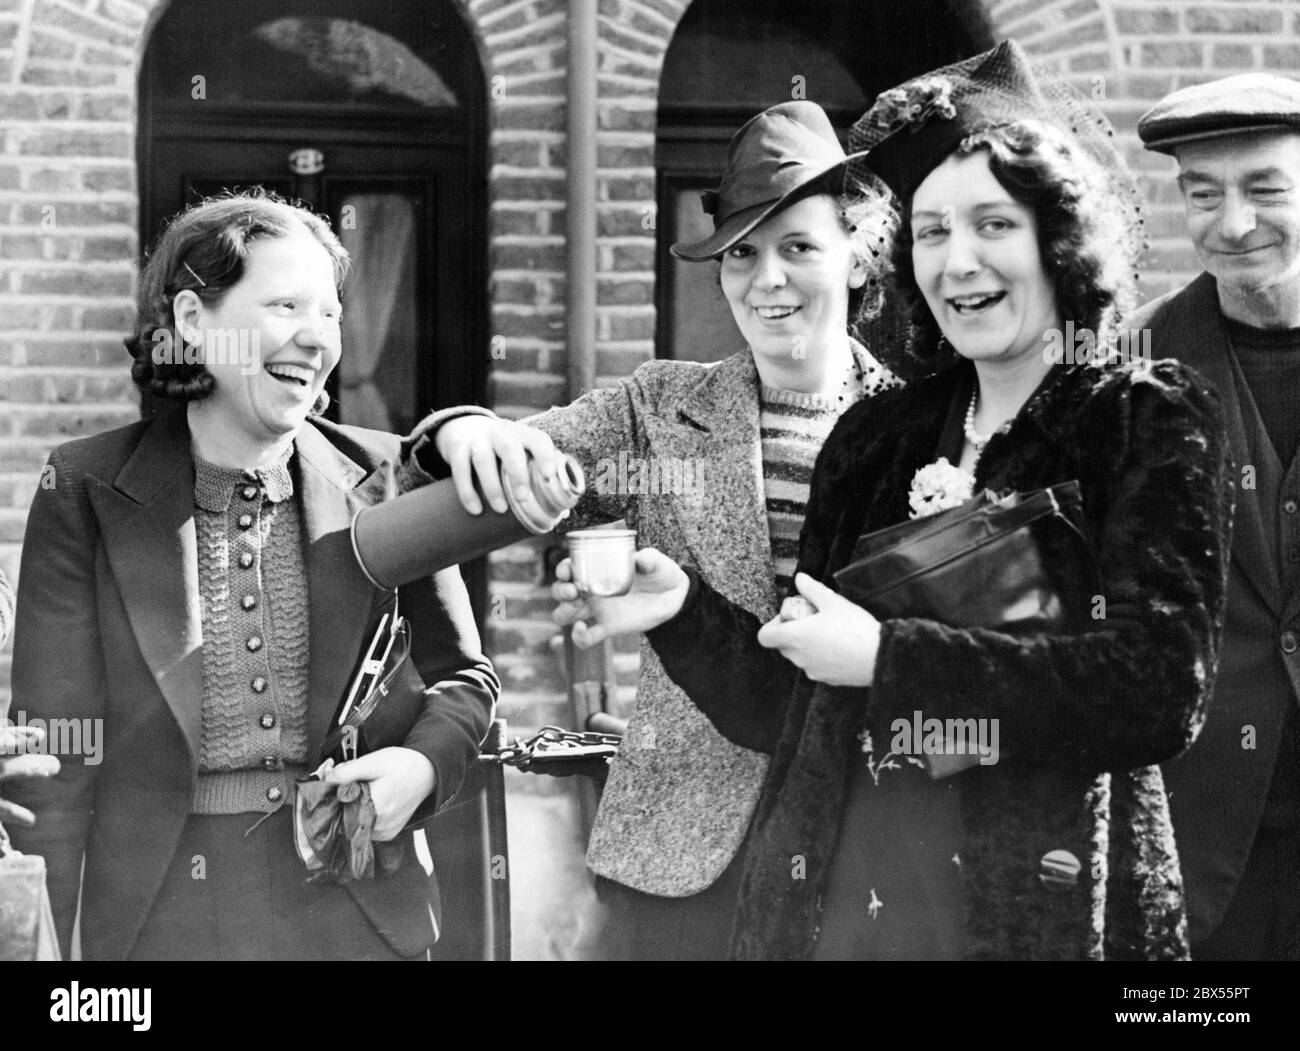 Young women refresh themselves with drinks from their thermos flasks in front of the main building of Siemens Brothers & Co, whose employees are on strike after redundancies. Stock Photo